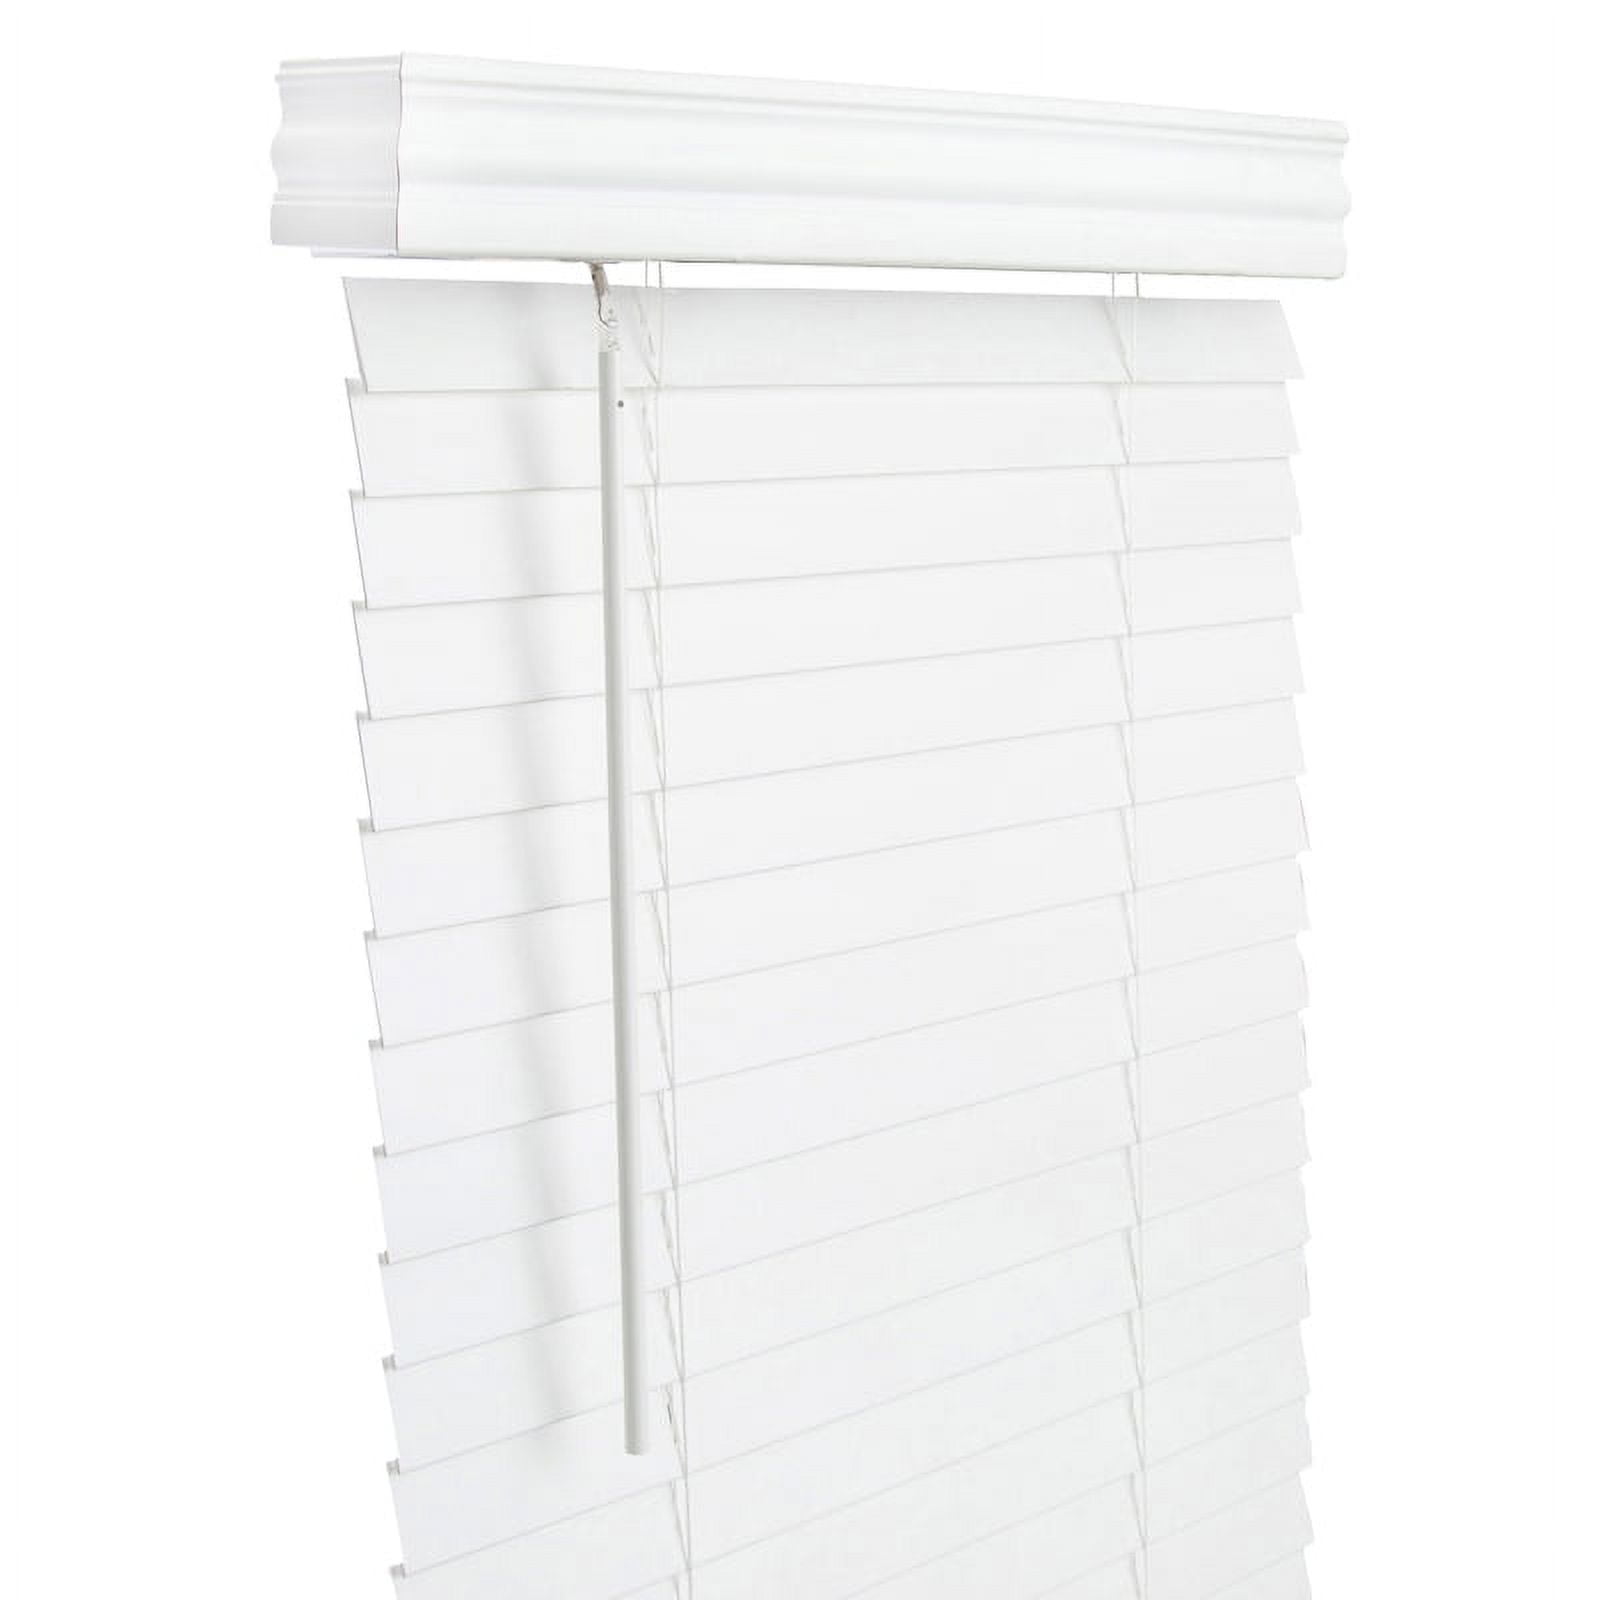 5005732 2 In. Faux Wood Cordless Blinds, White - 36 X 60 In.